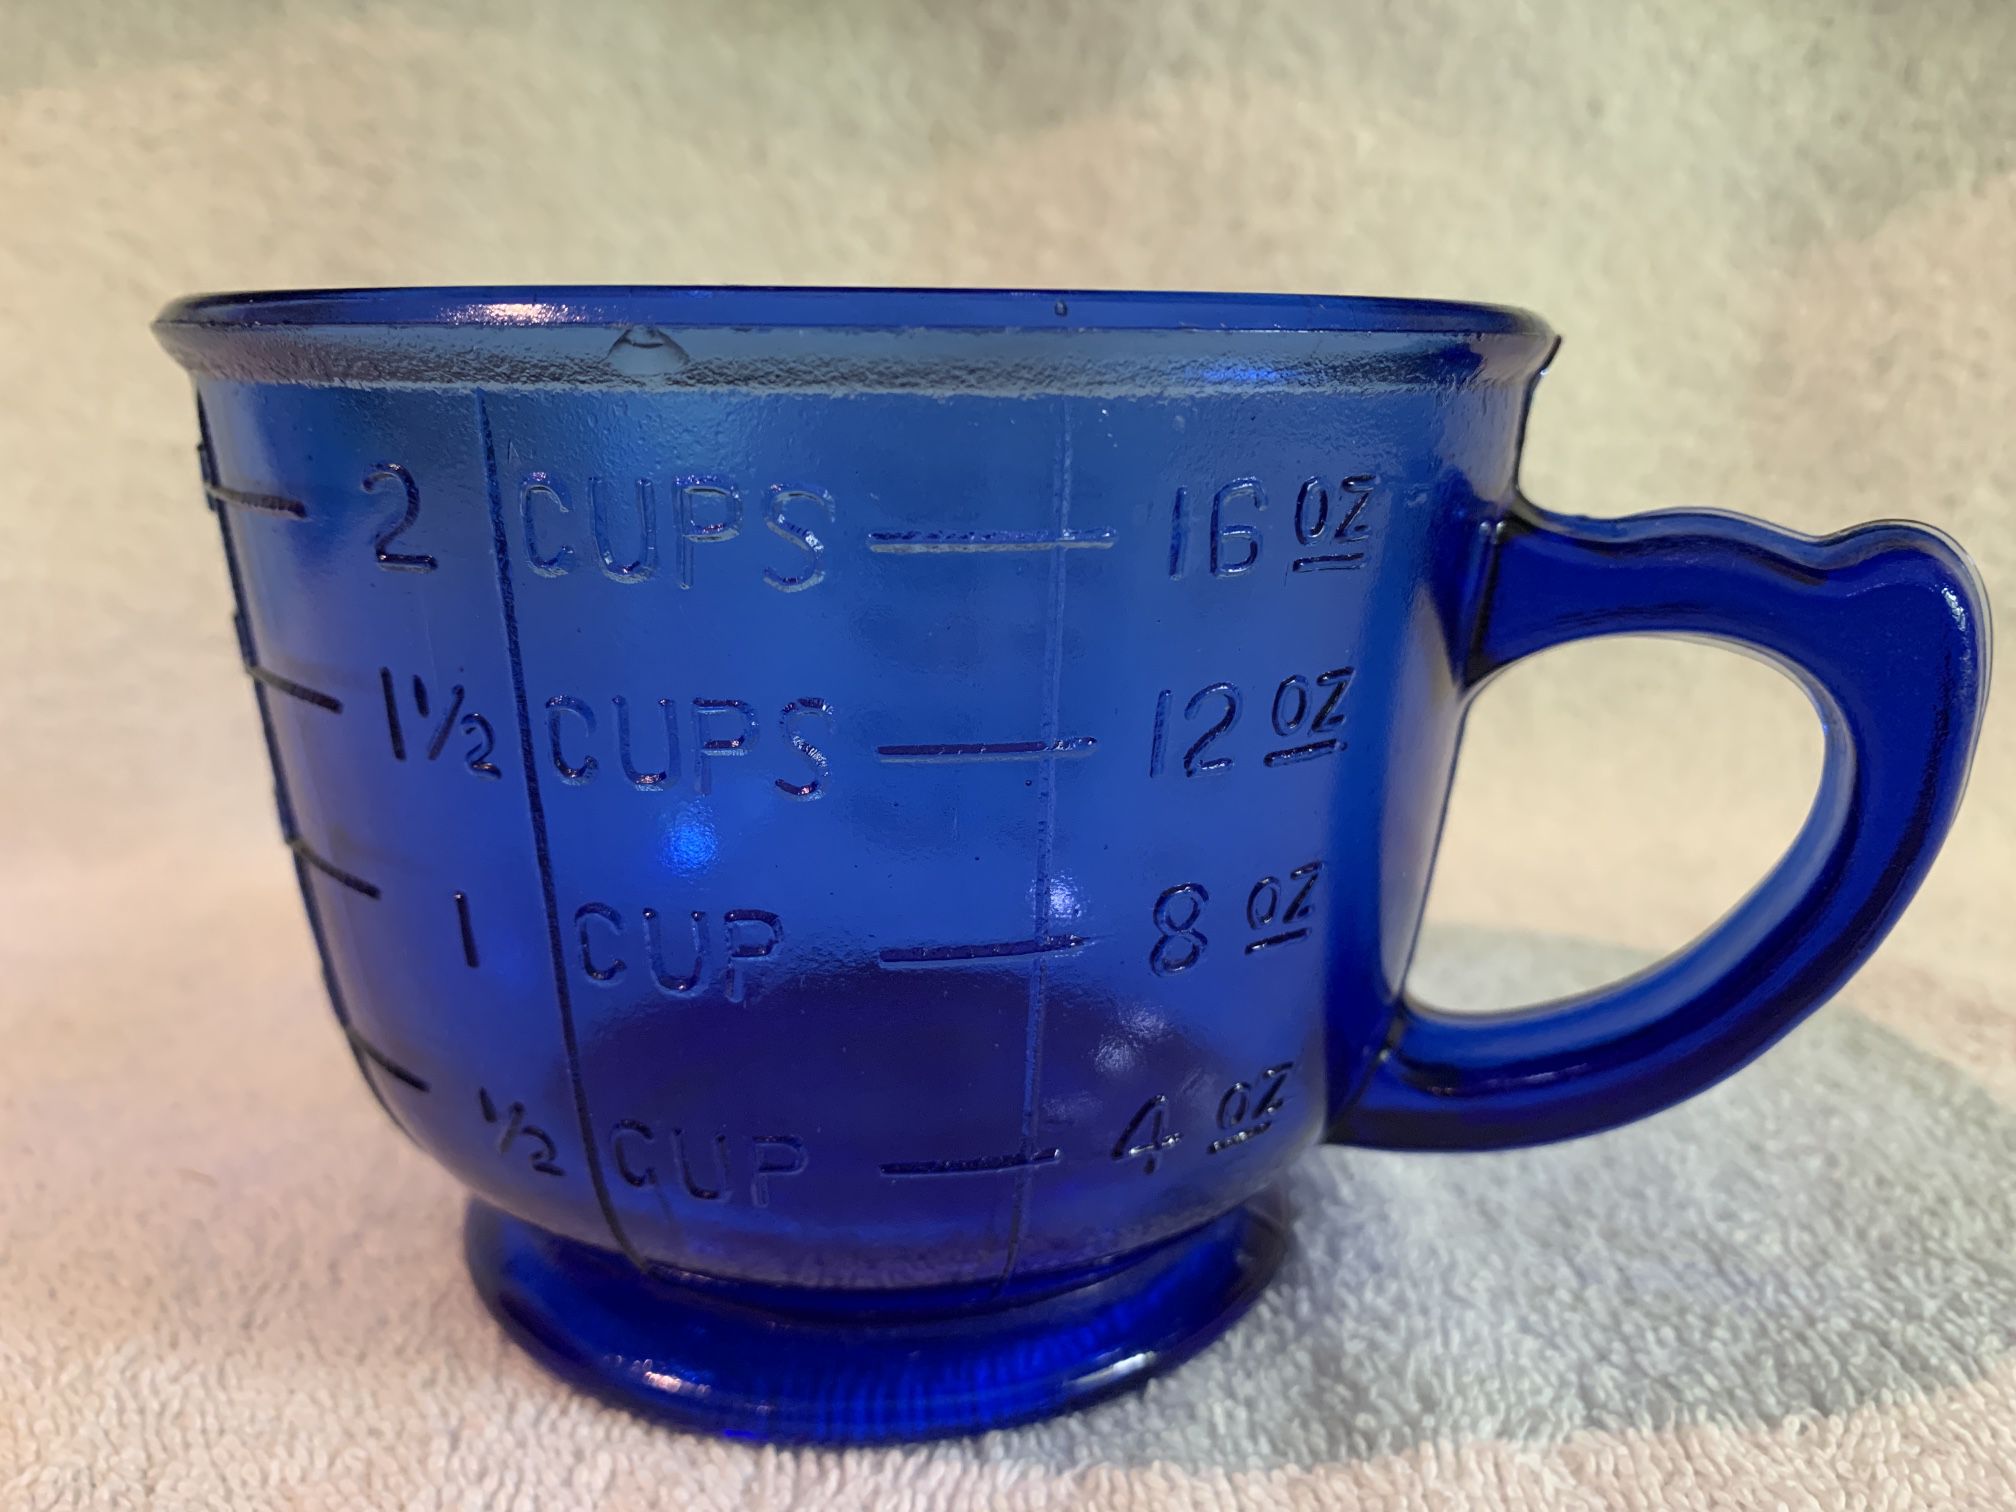 Vintage Cobalt Blue Measuring And Mixing Cup 16 Oz